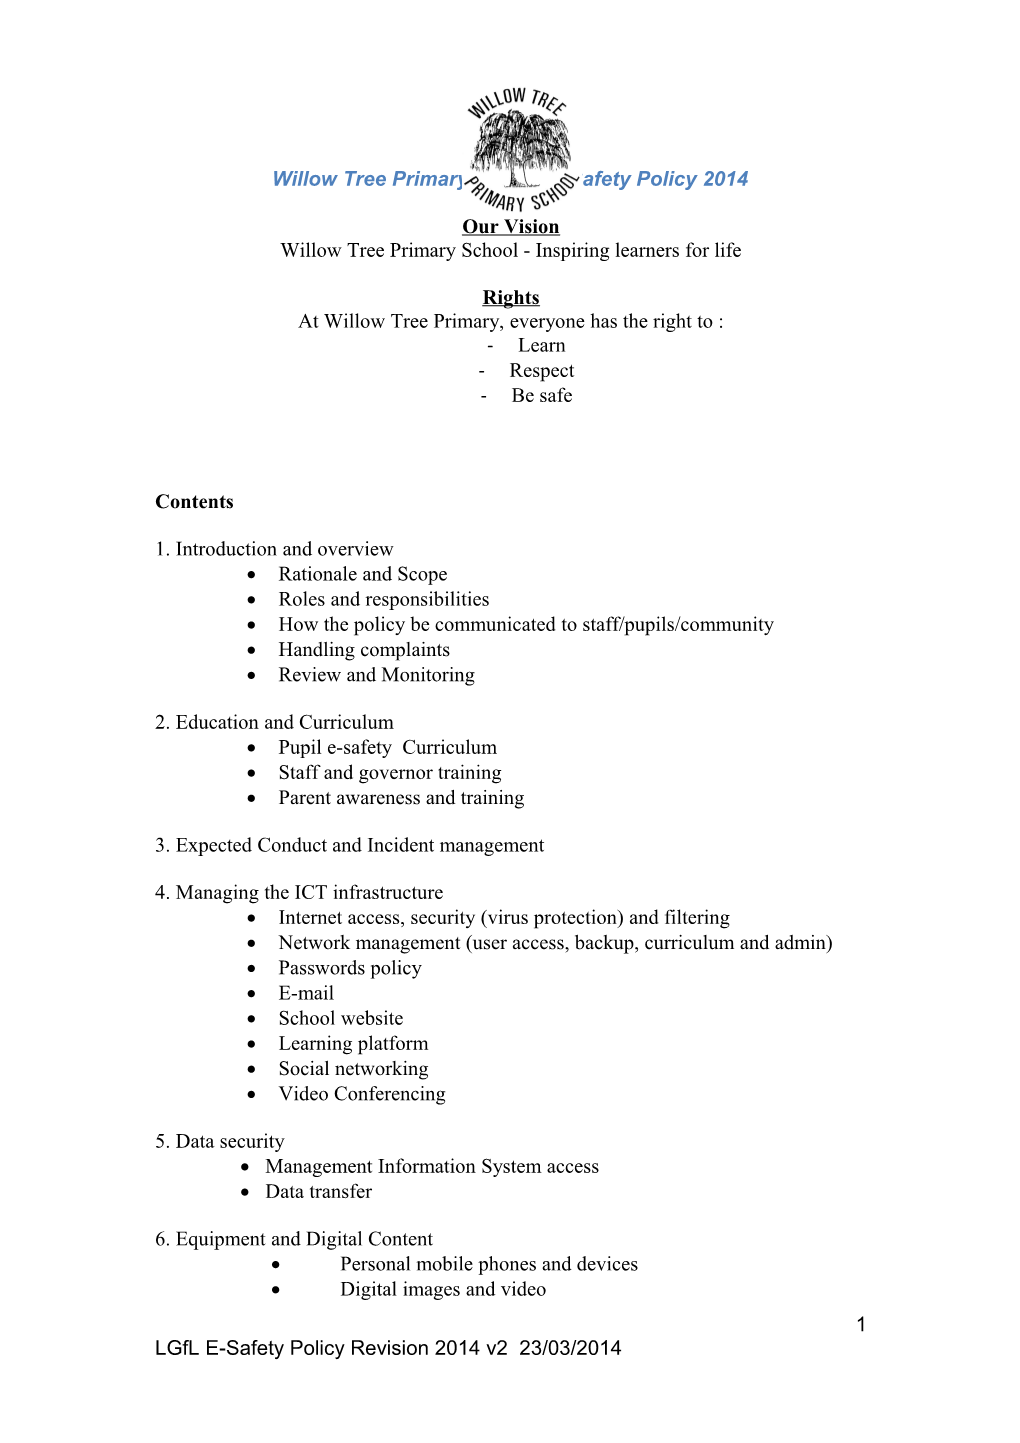 BPSI School E-Safety Policy Template s1